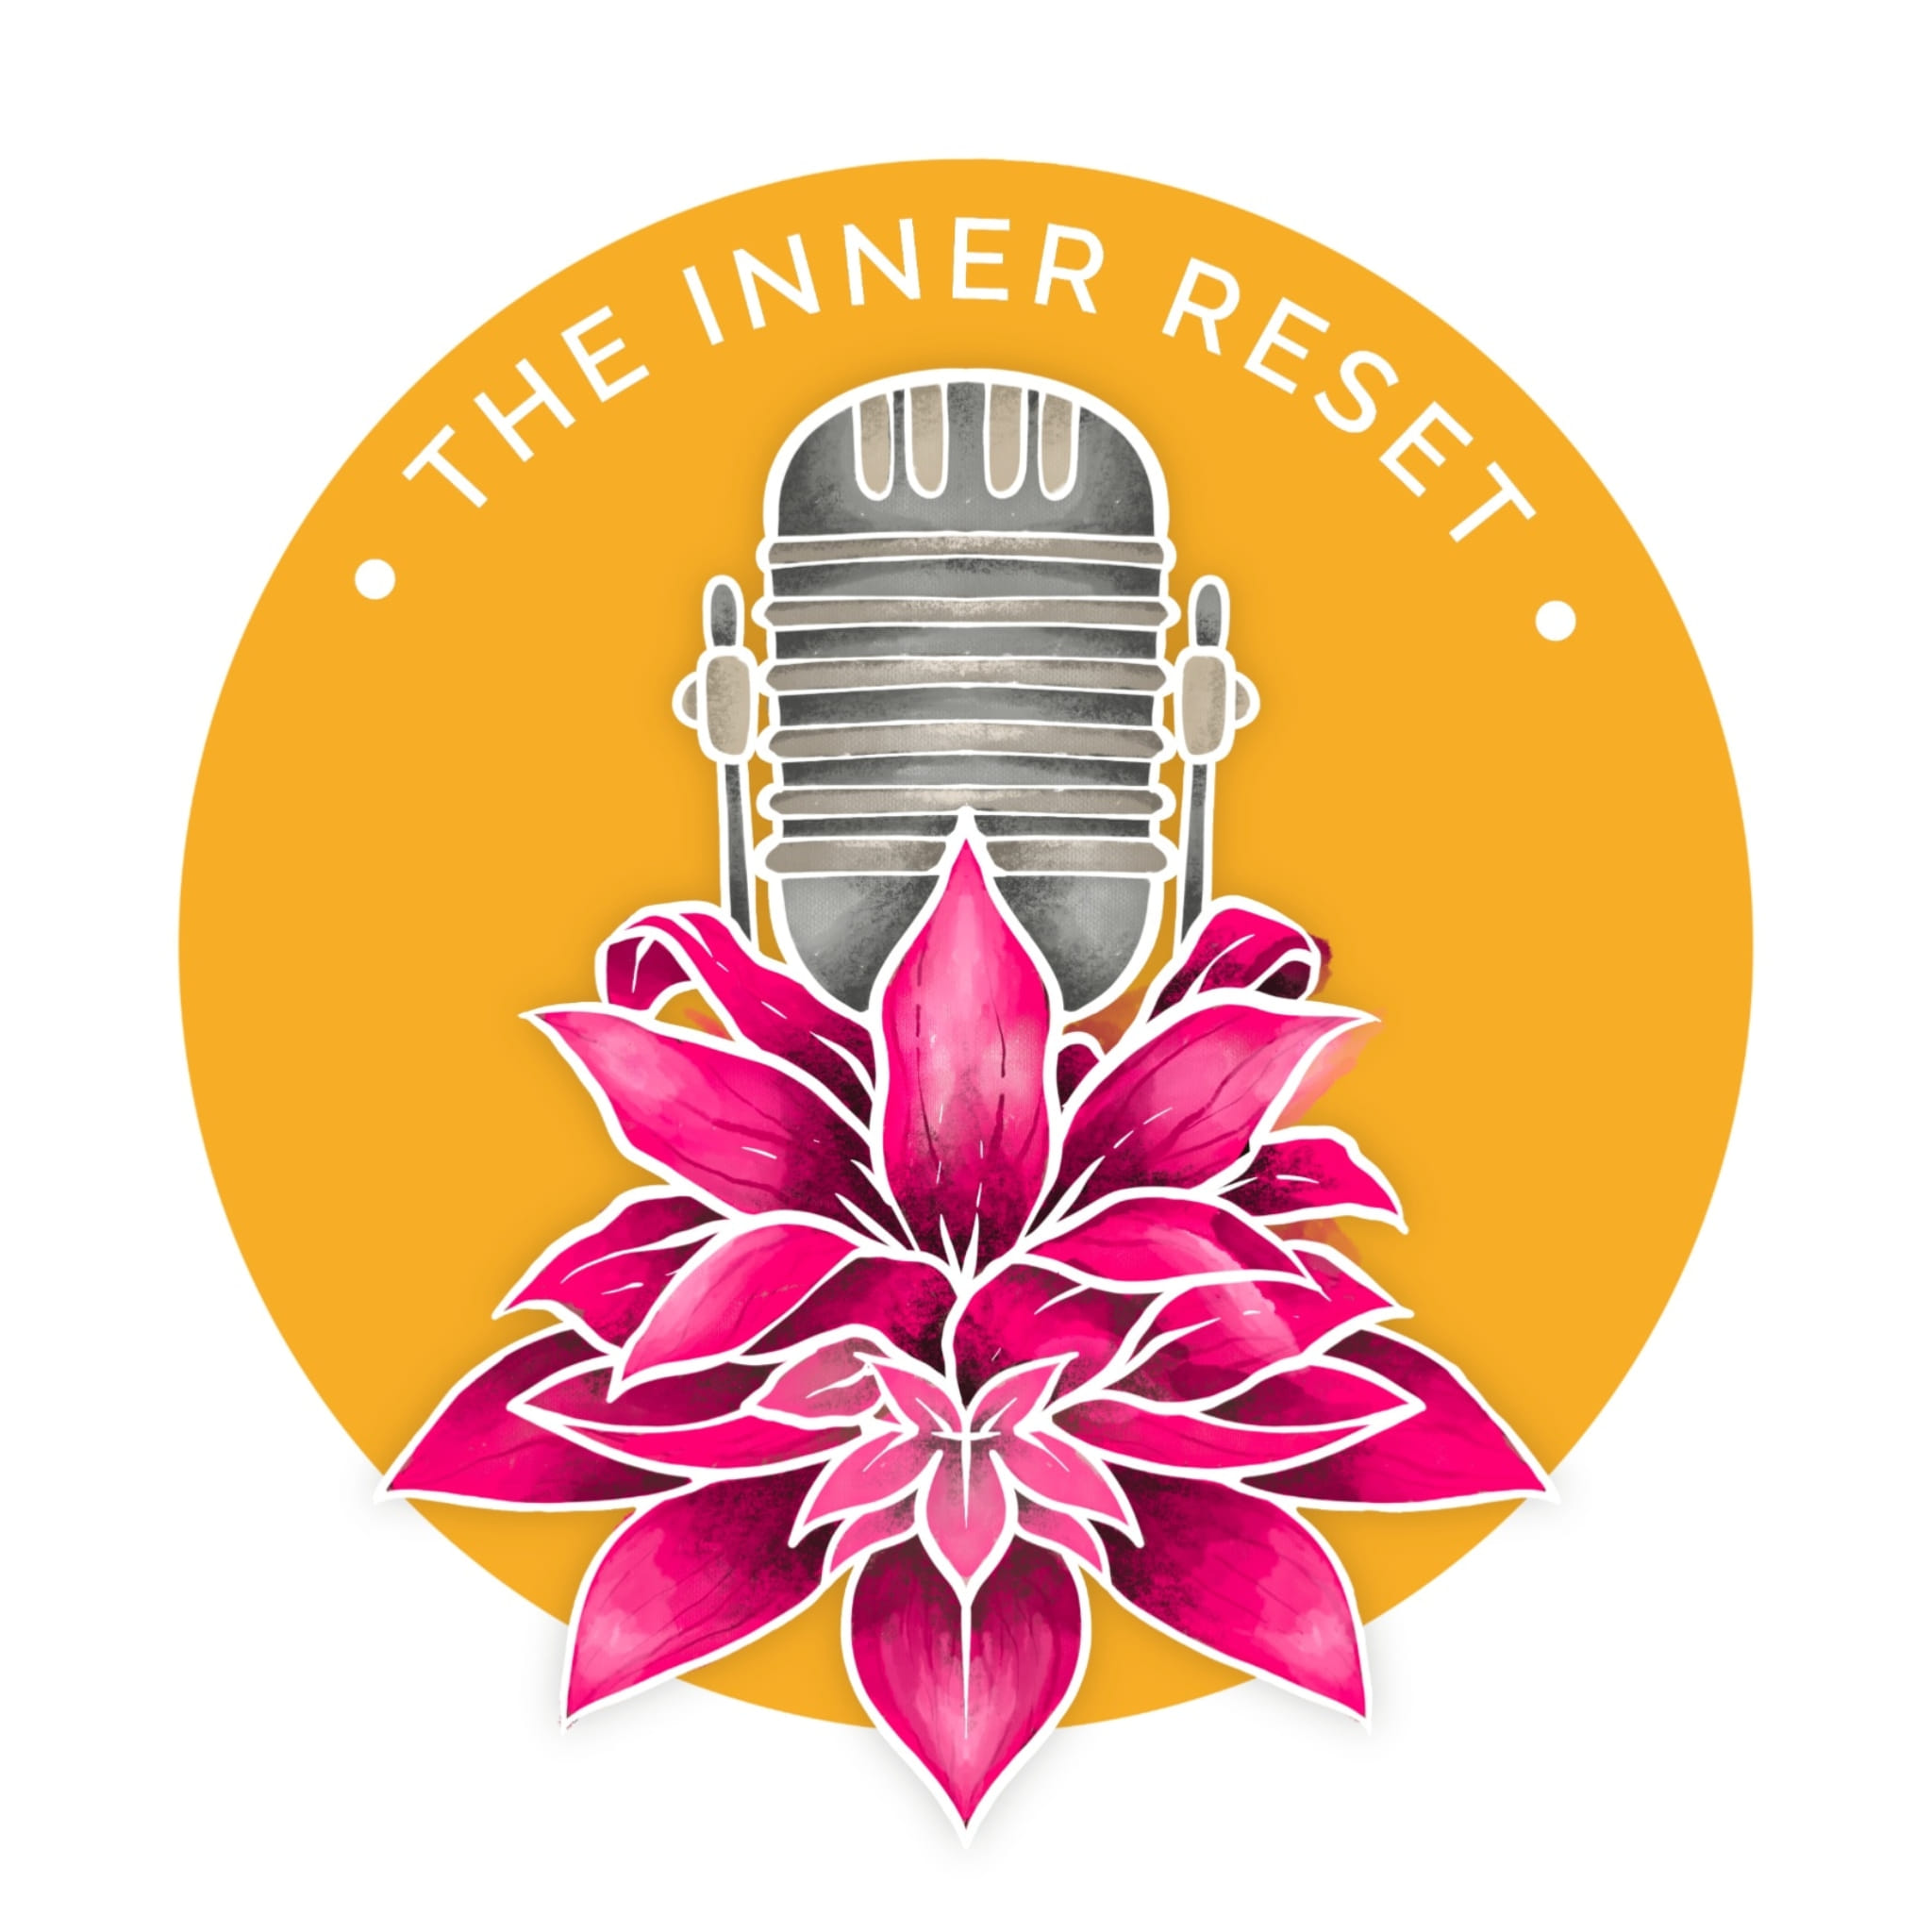 On the verge of self-discovery: How The Inner Reset seeks to spark change from within